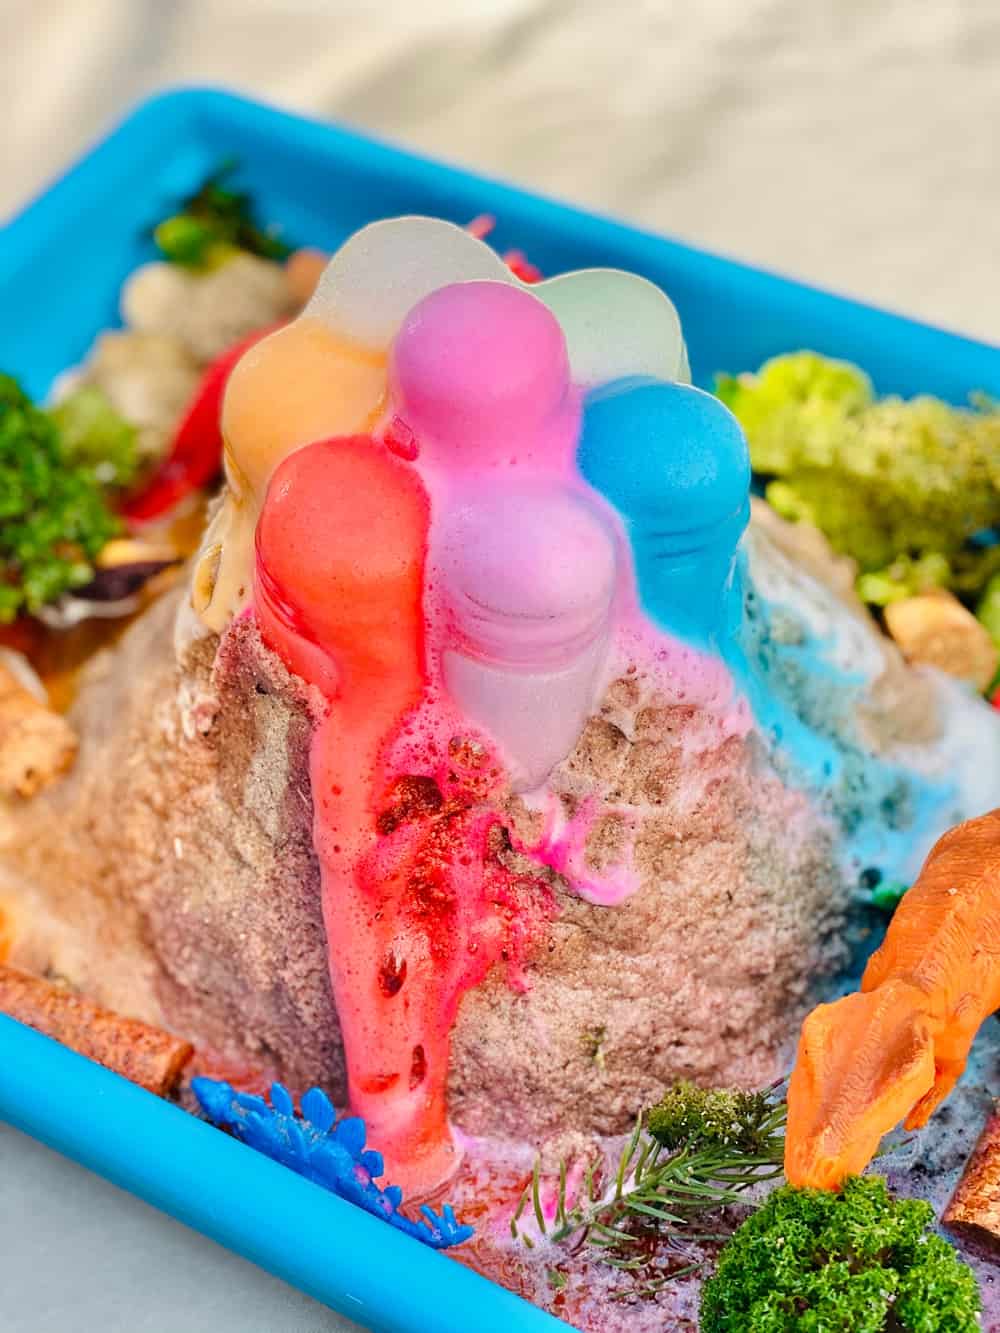 Rainbow Baking Soda Volcano Experiment. Sand around tubes as the volcano in a blue plastic bin. 